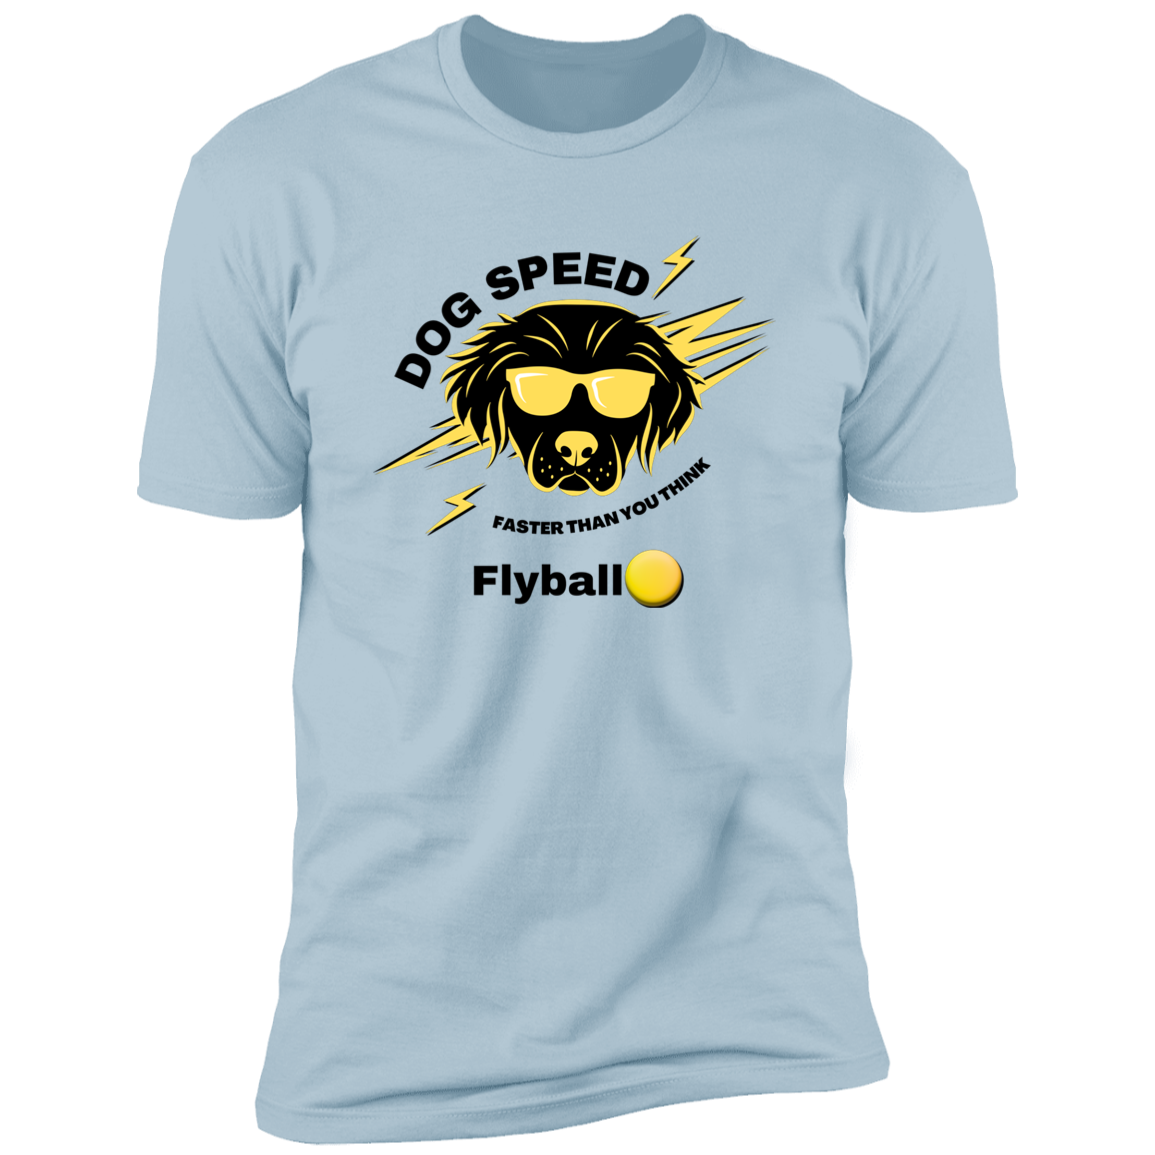 Dog Speed Faster Than You Think Flyball T-shirt, Flyball shirt dog shirt for humans, in light blue